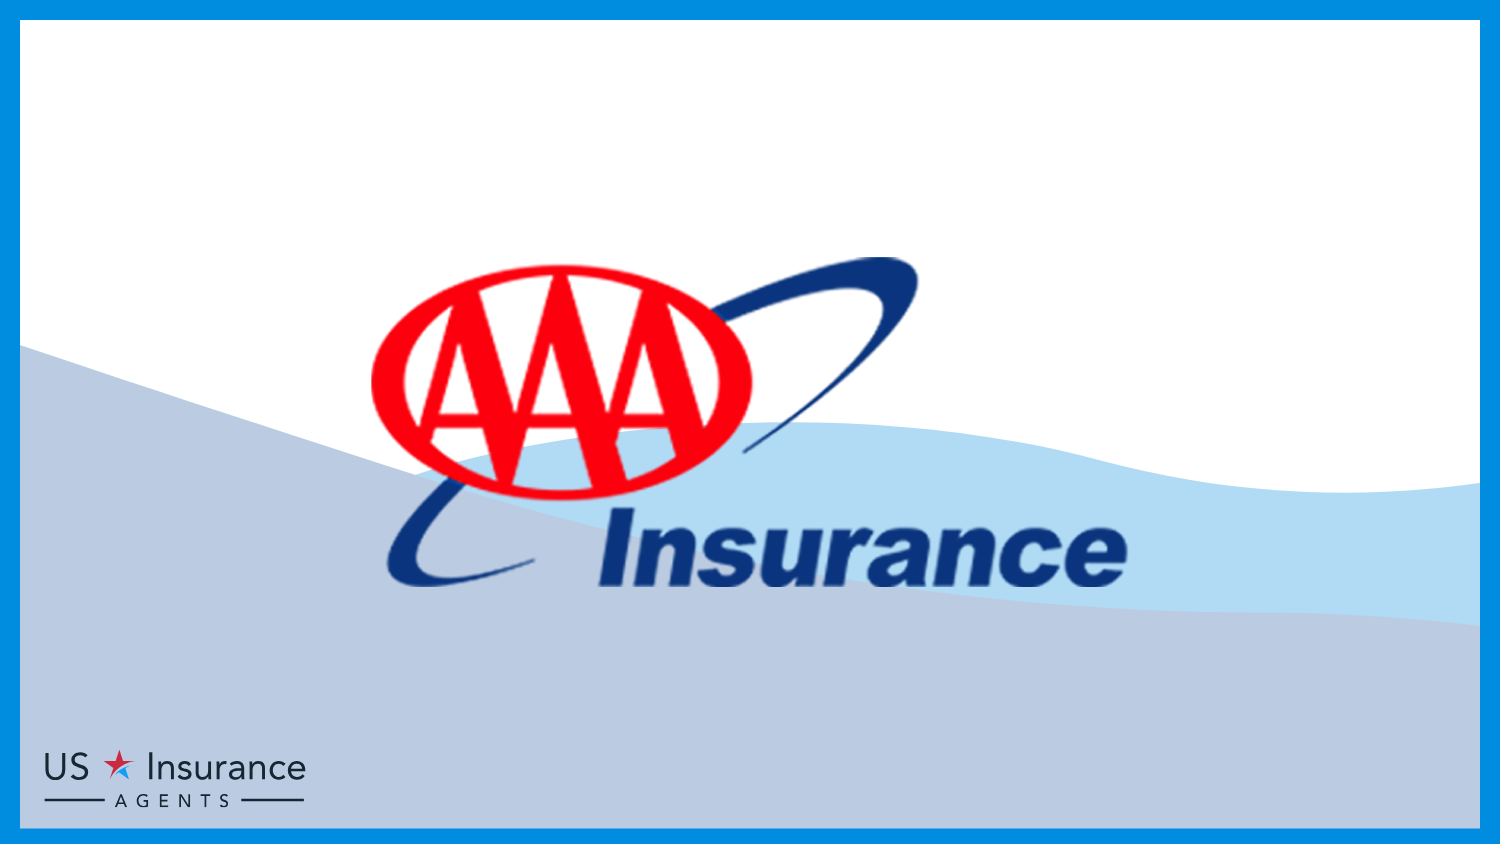 AAA: Best Car Insurance for Healthcare Professionals